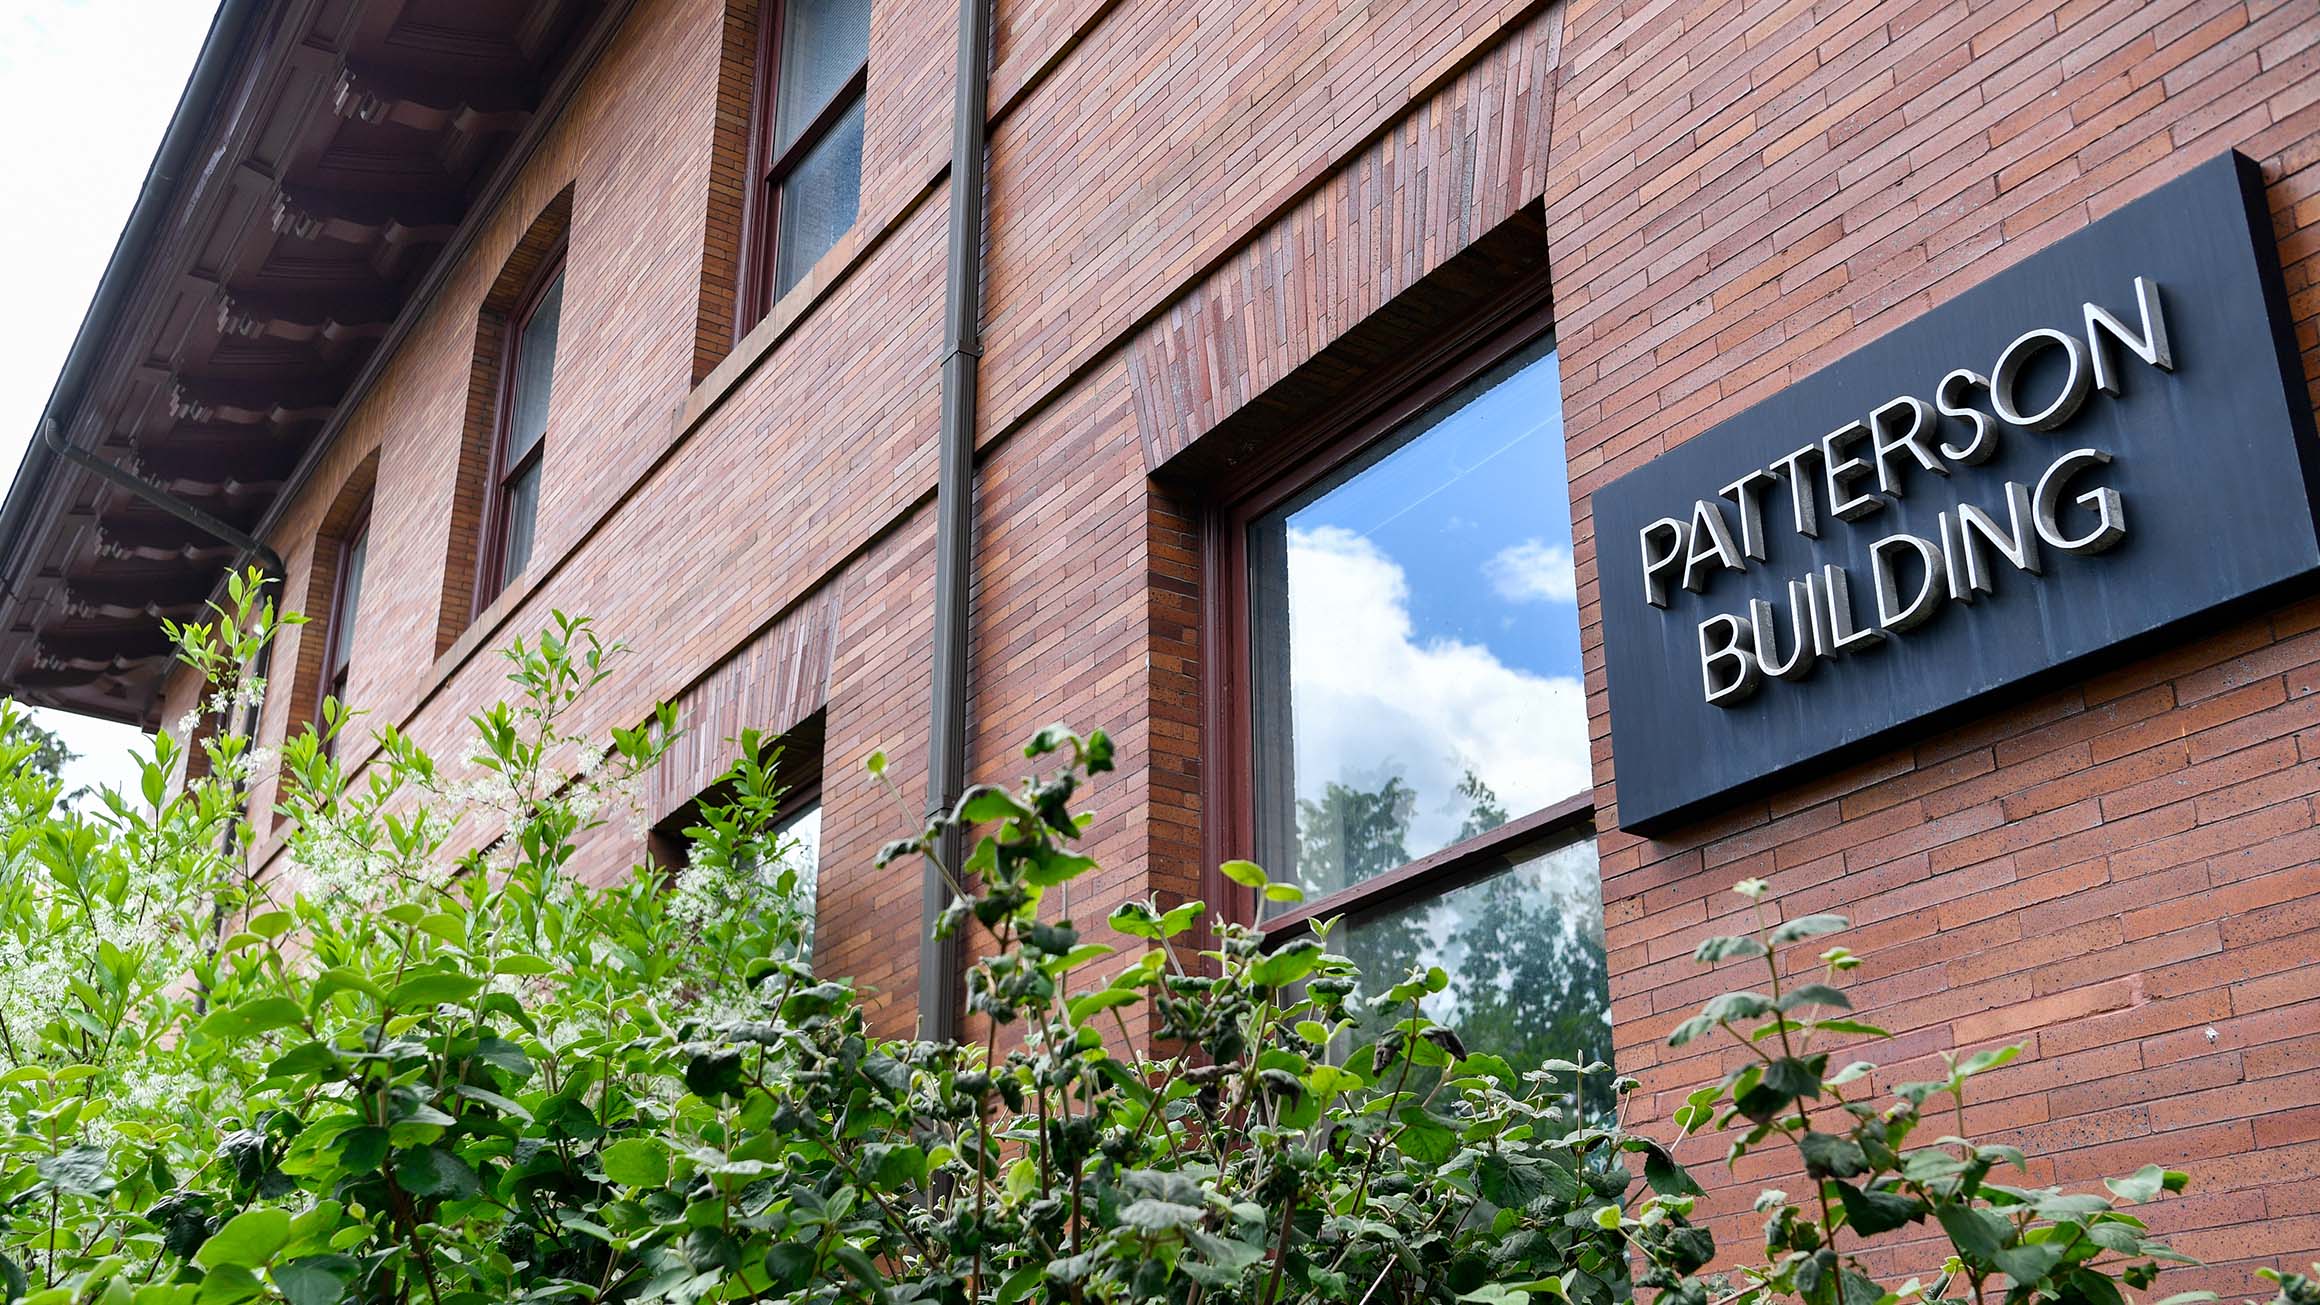 The Patterson Building's sign is shown.